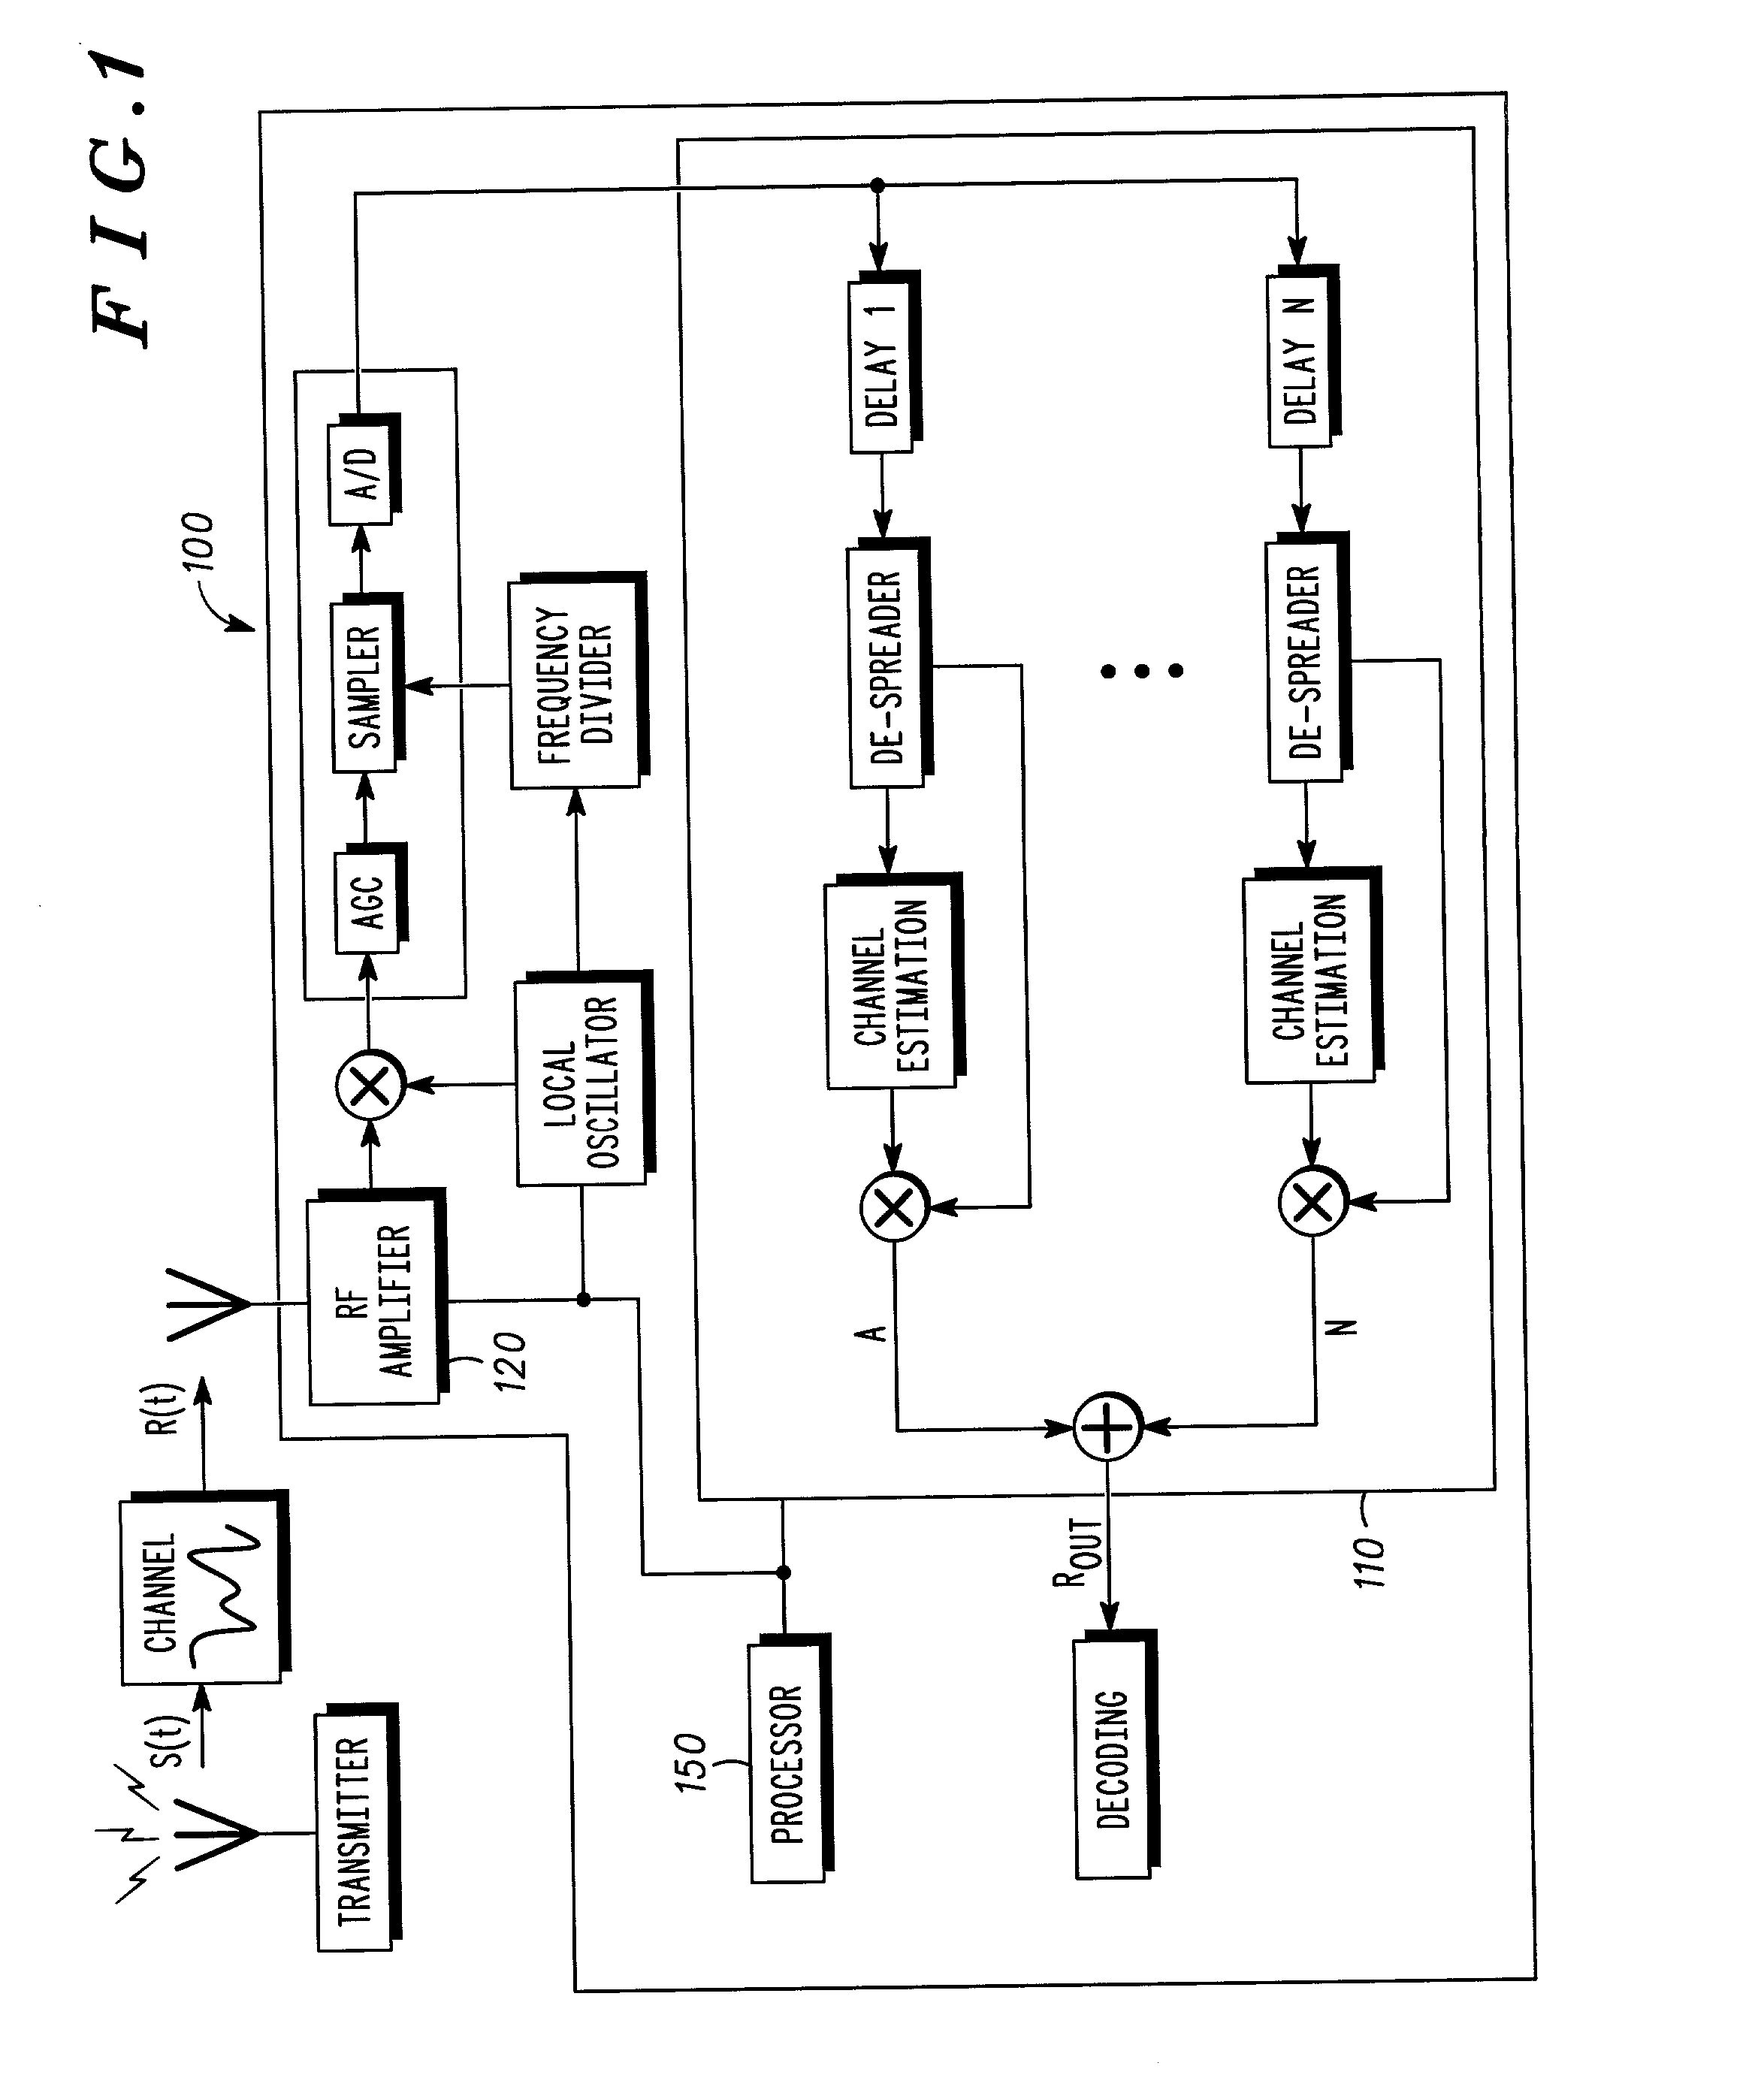 Doppler spread/velocity estimation in mobile wireless communication devices and methods therefor